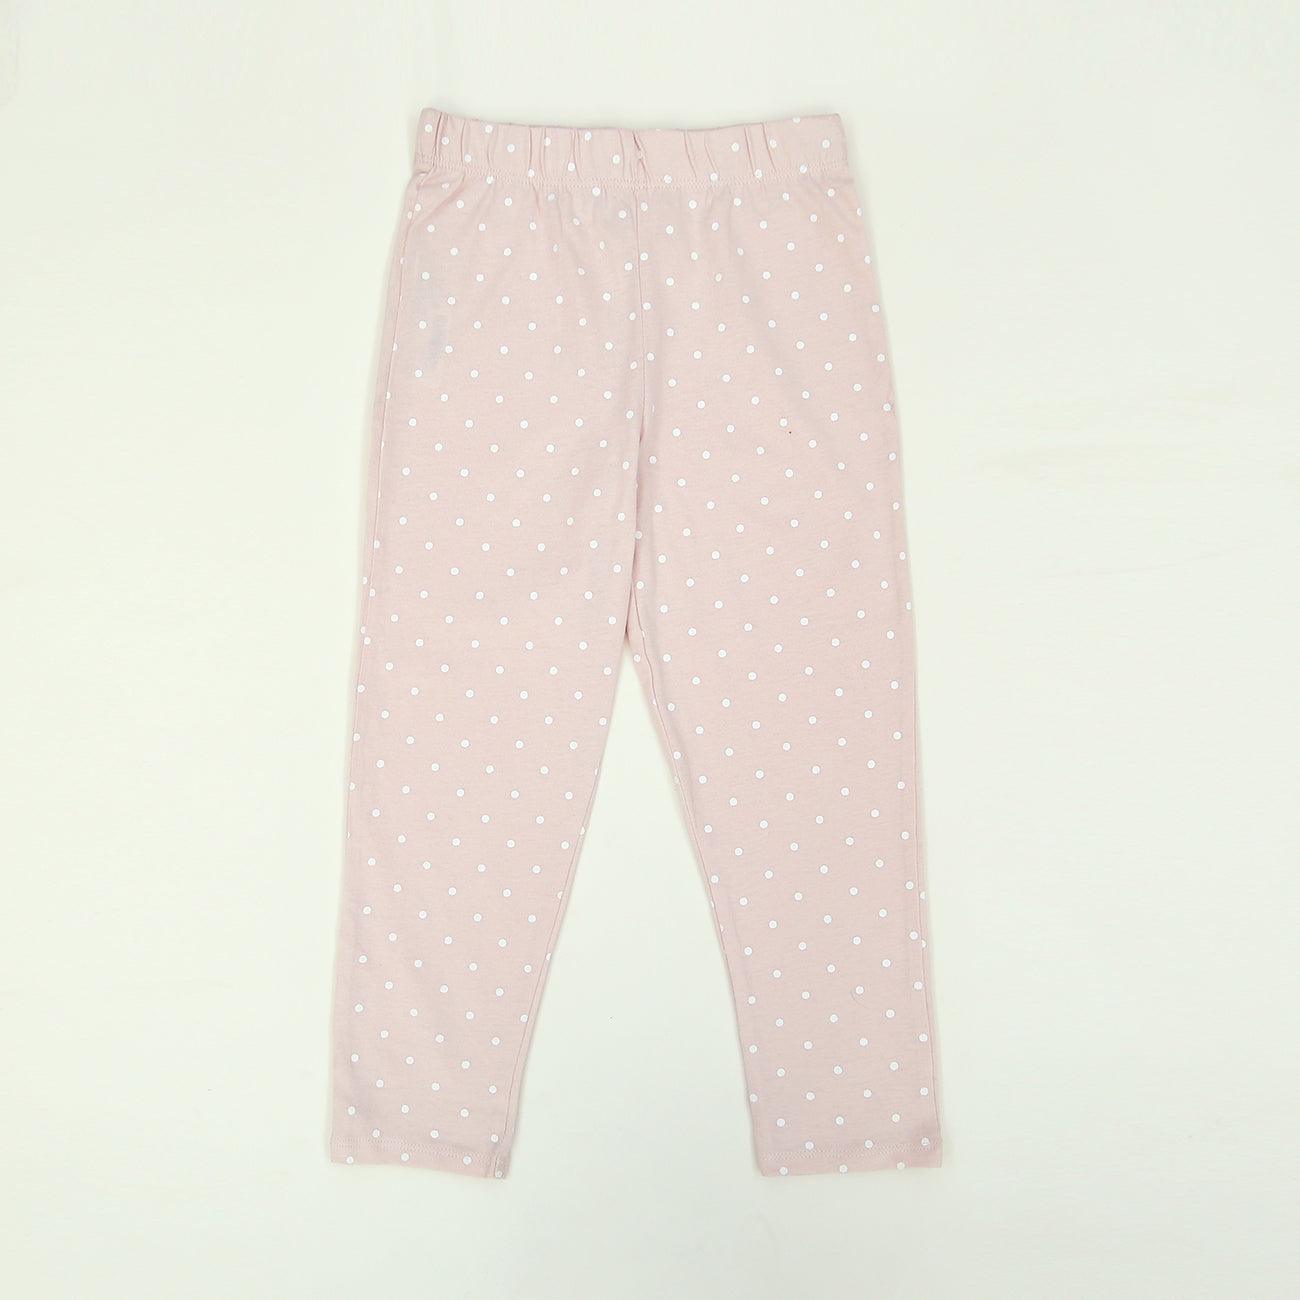 Imported All-Over Printed Soft Cotton Legging For Girls 9-12 MONTH - 3-4 YRS (LE-11572) - Brands River